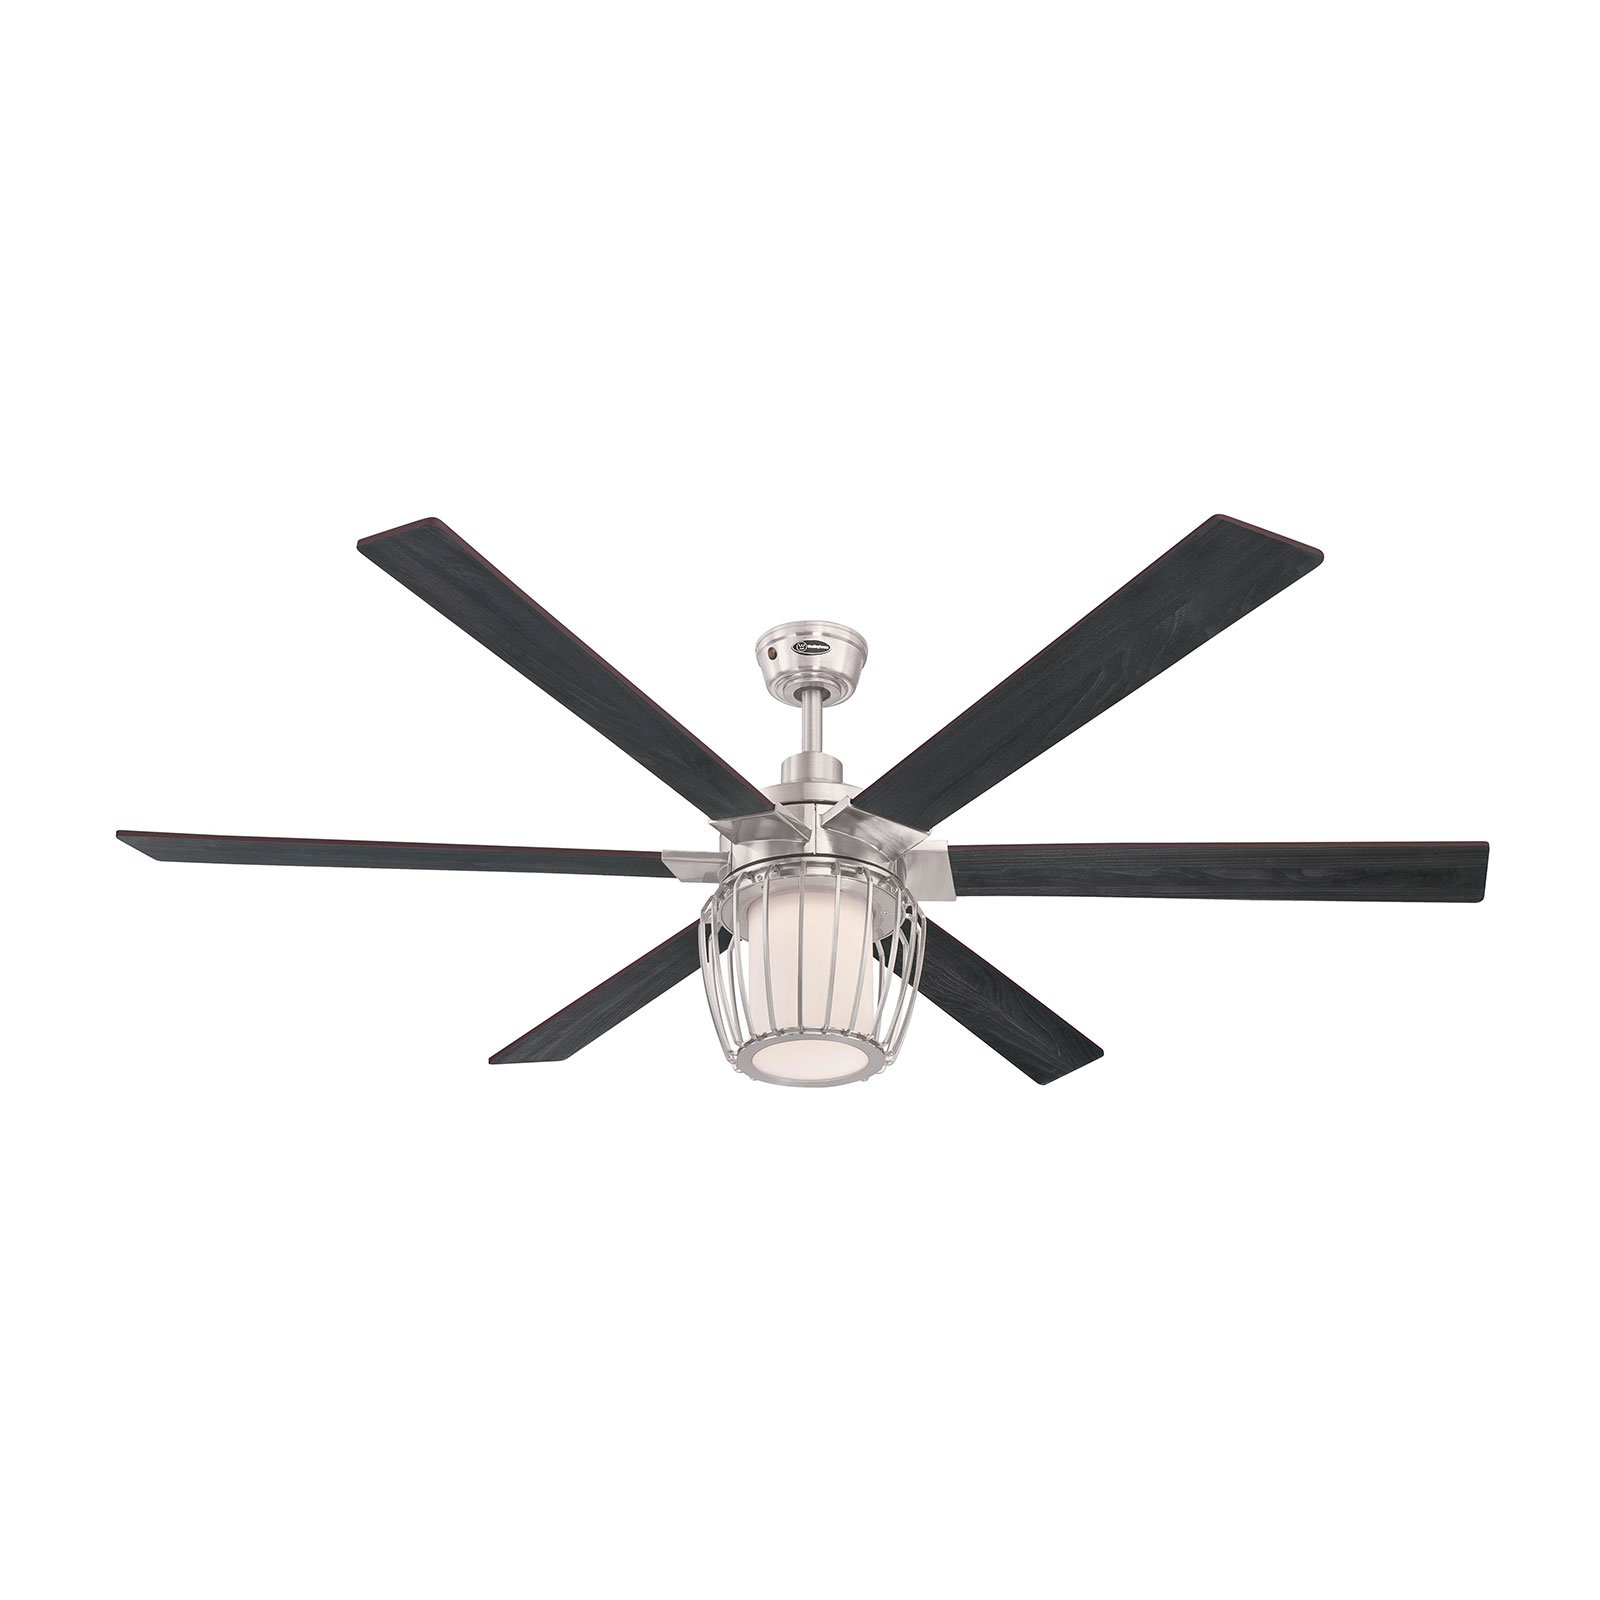 Westinghouse Willa ceiling fan with LED